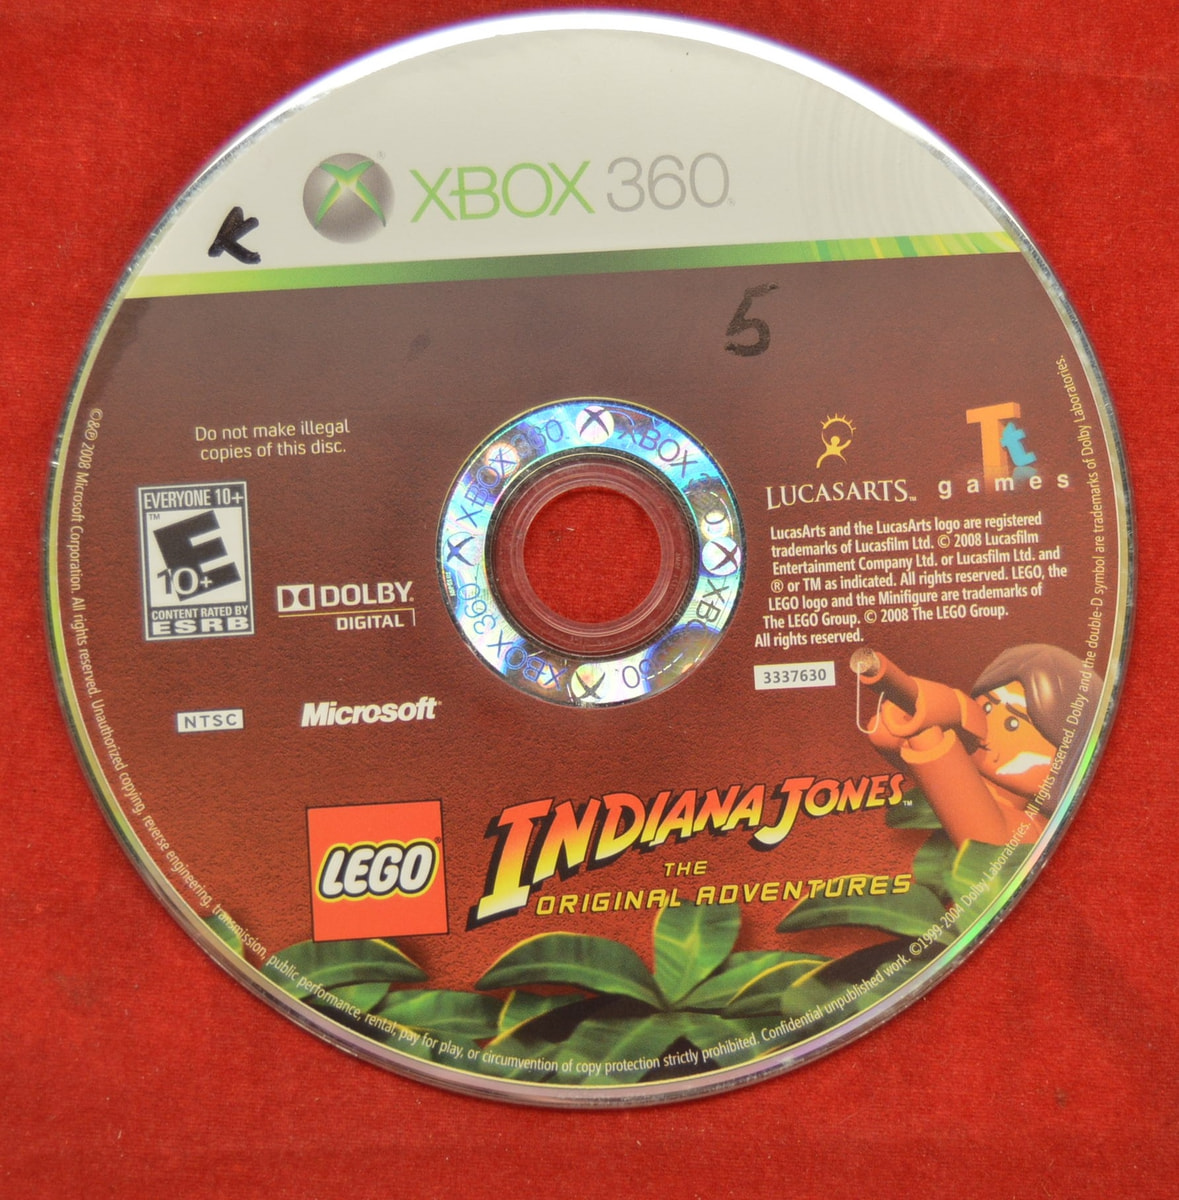 Mos thema Wetenschap Hot Spot Collectibles and Toys - Lego Indiana Jone The original Adventures  Game Disc Only